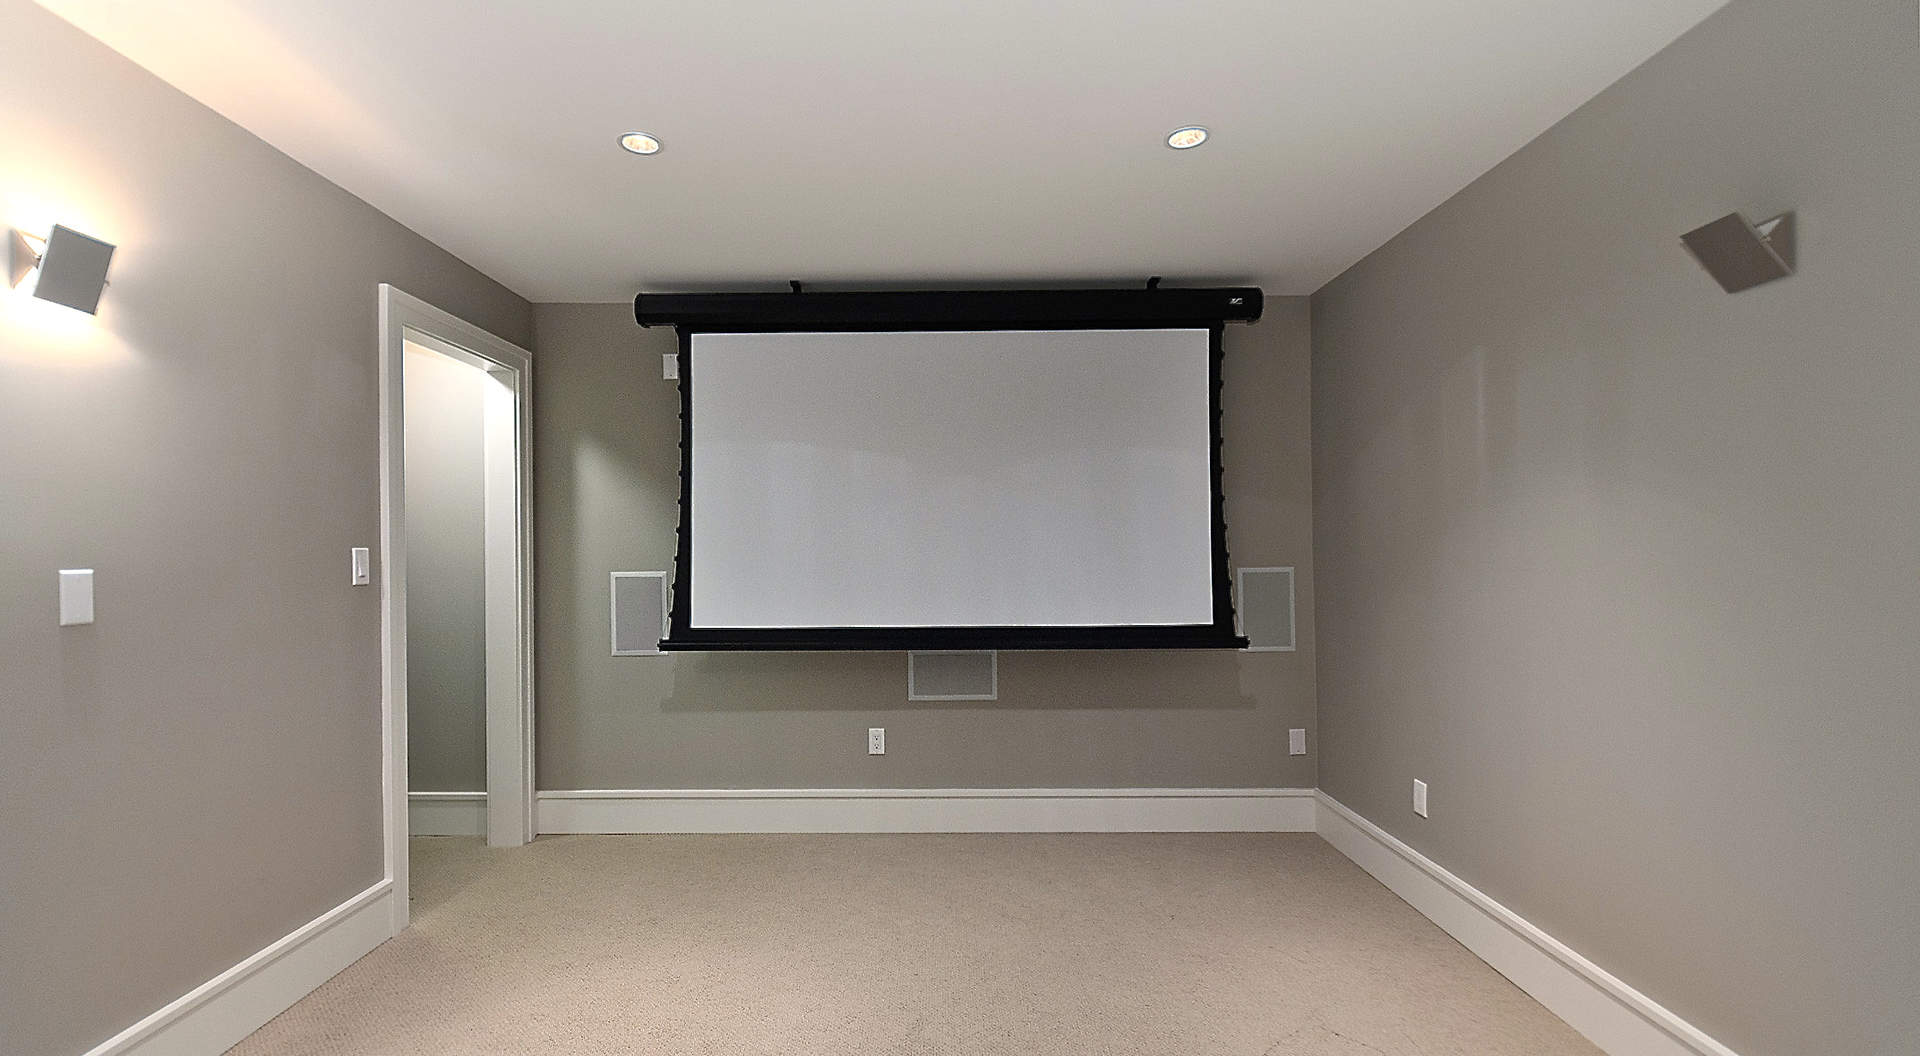 Home Theater with Surround Sound System